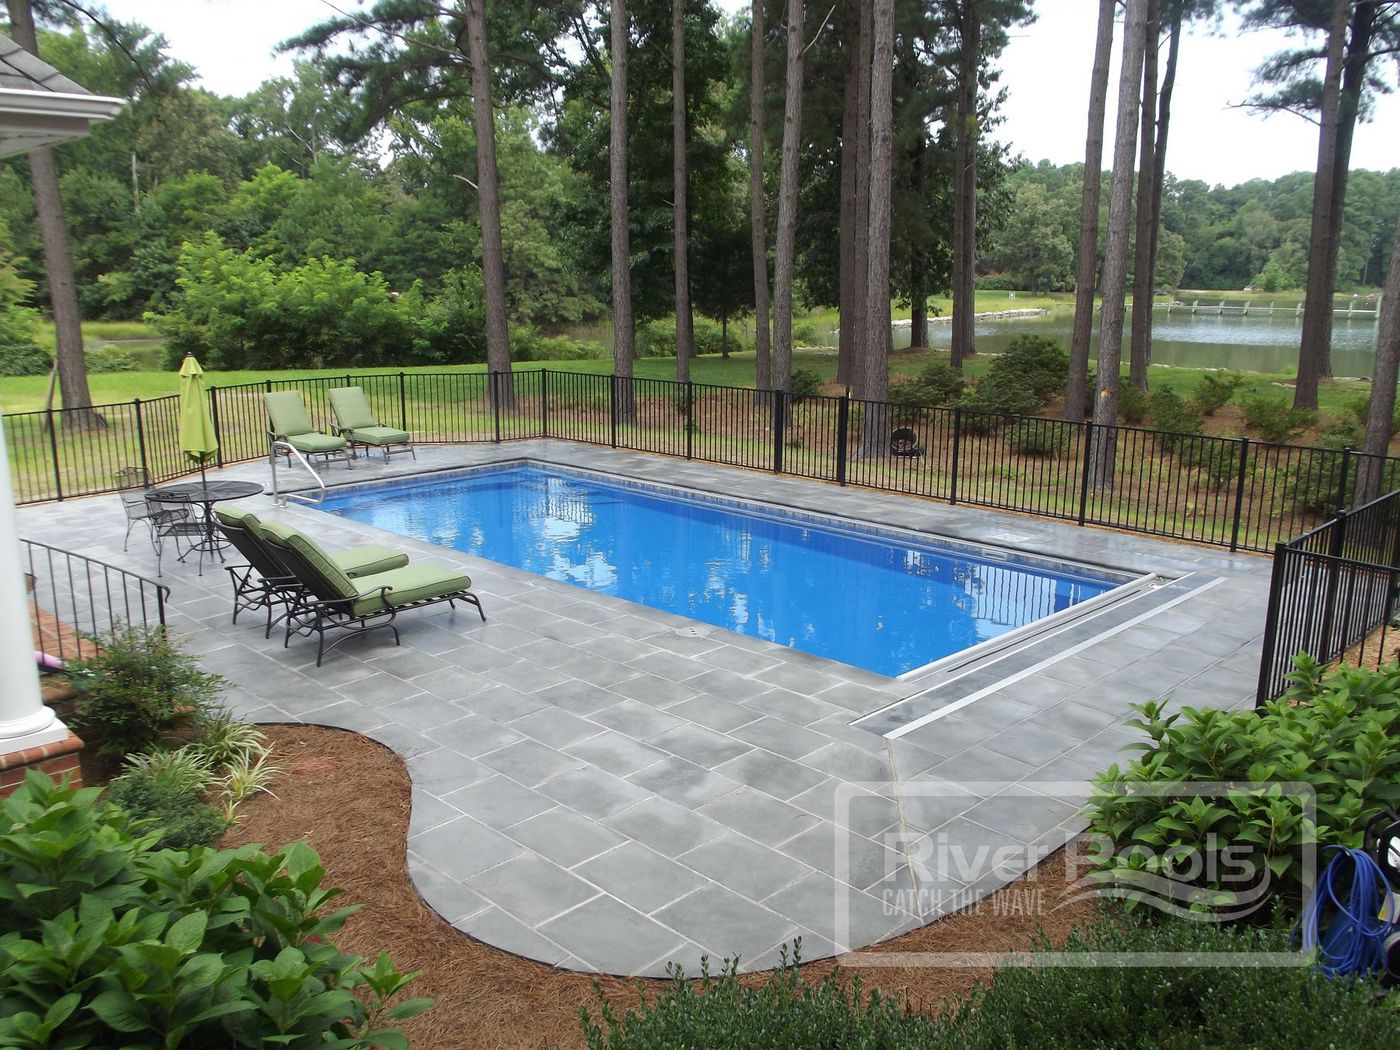 Small Pool Design For A Yard, Inground Pool For Small Yards